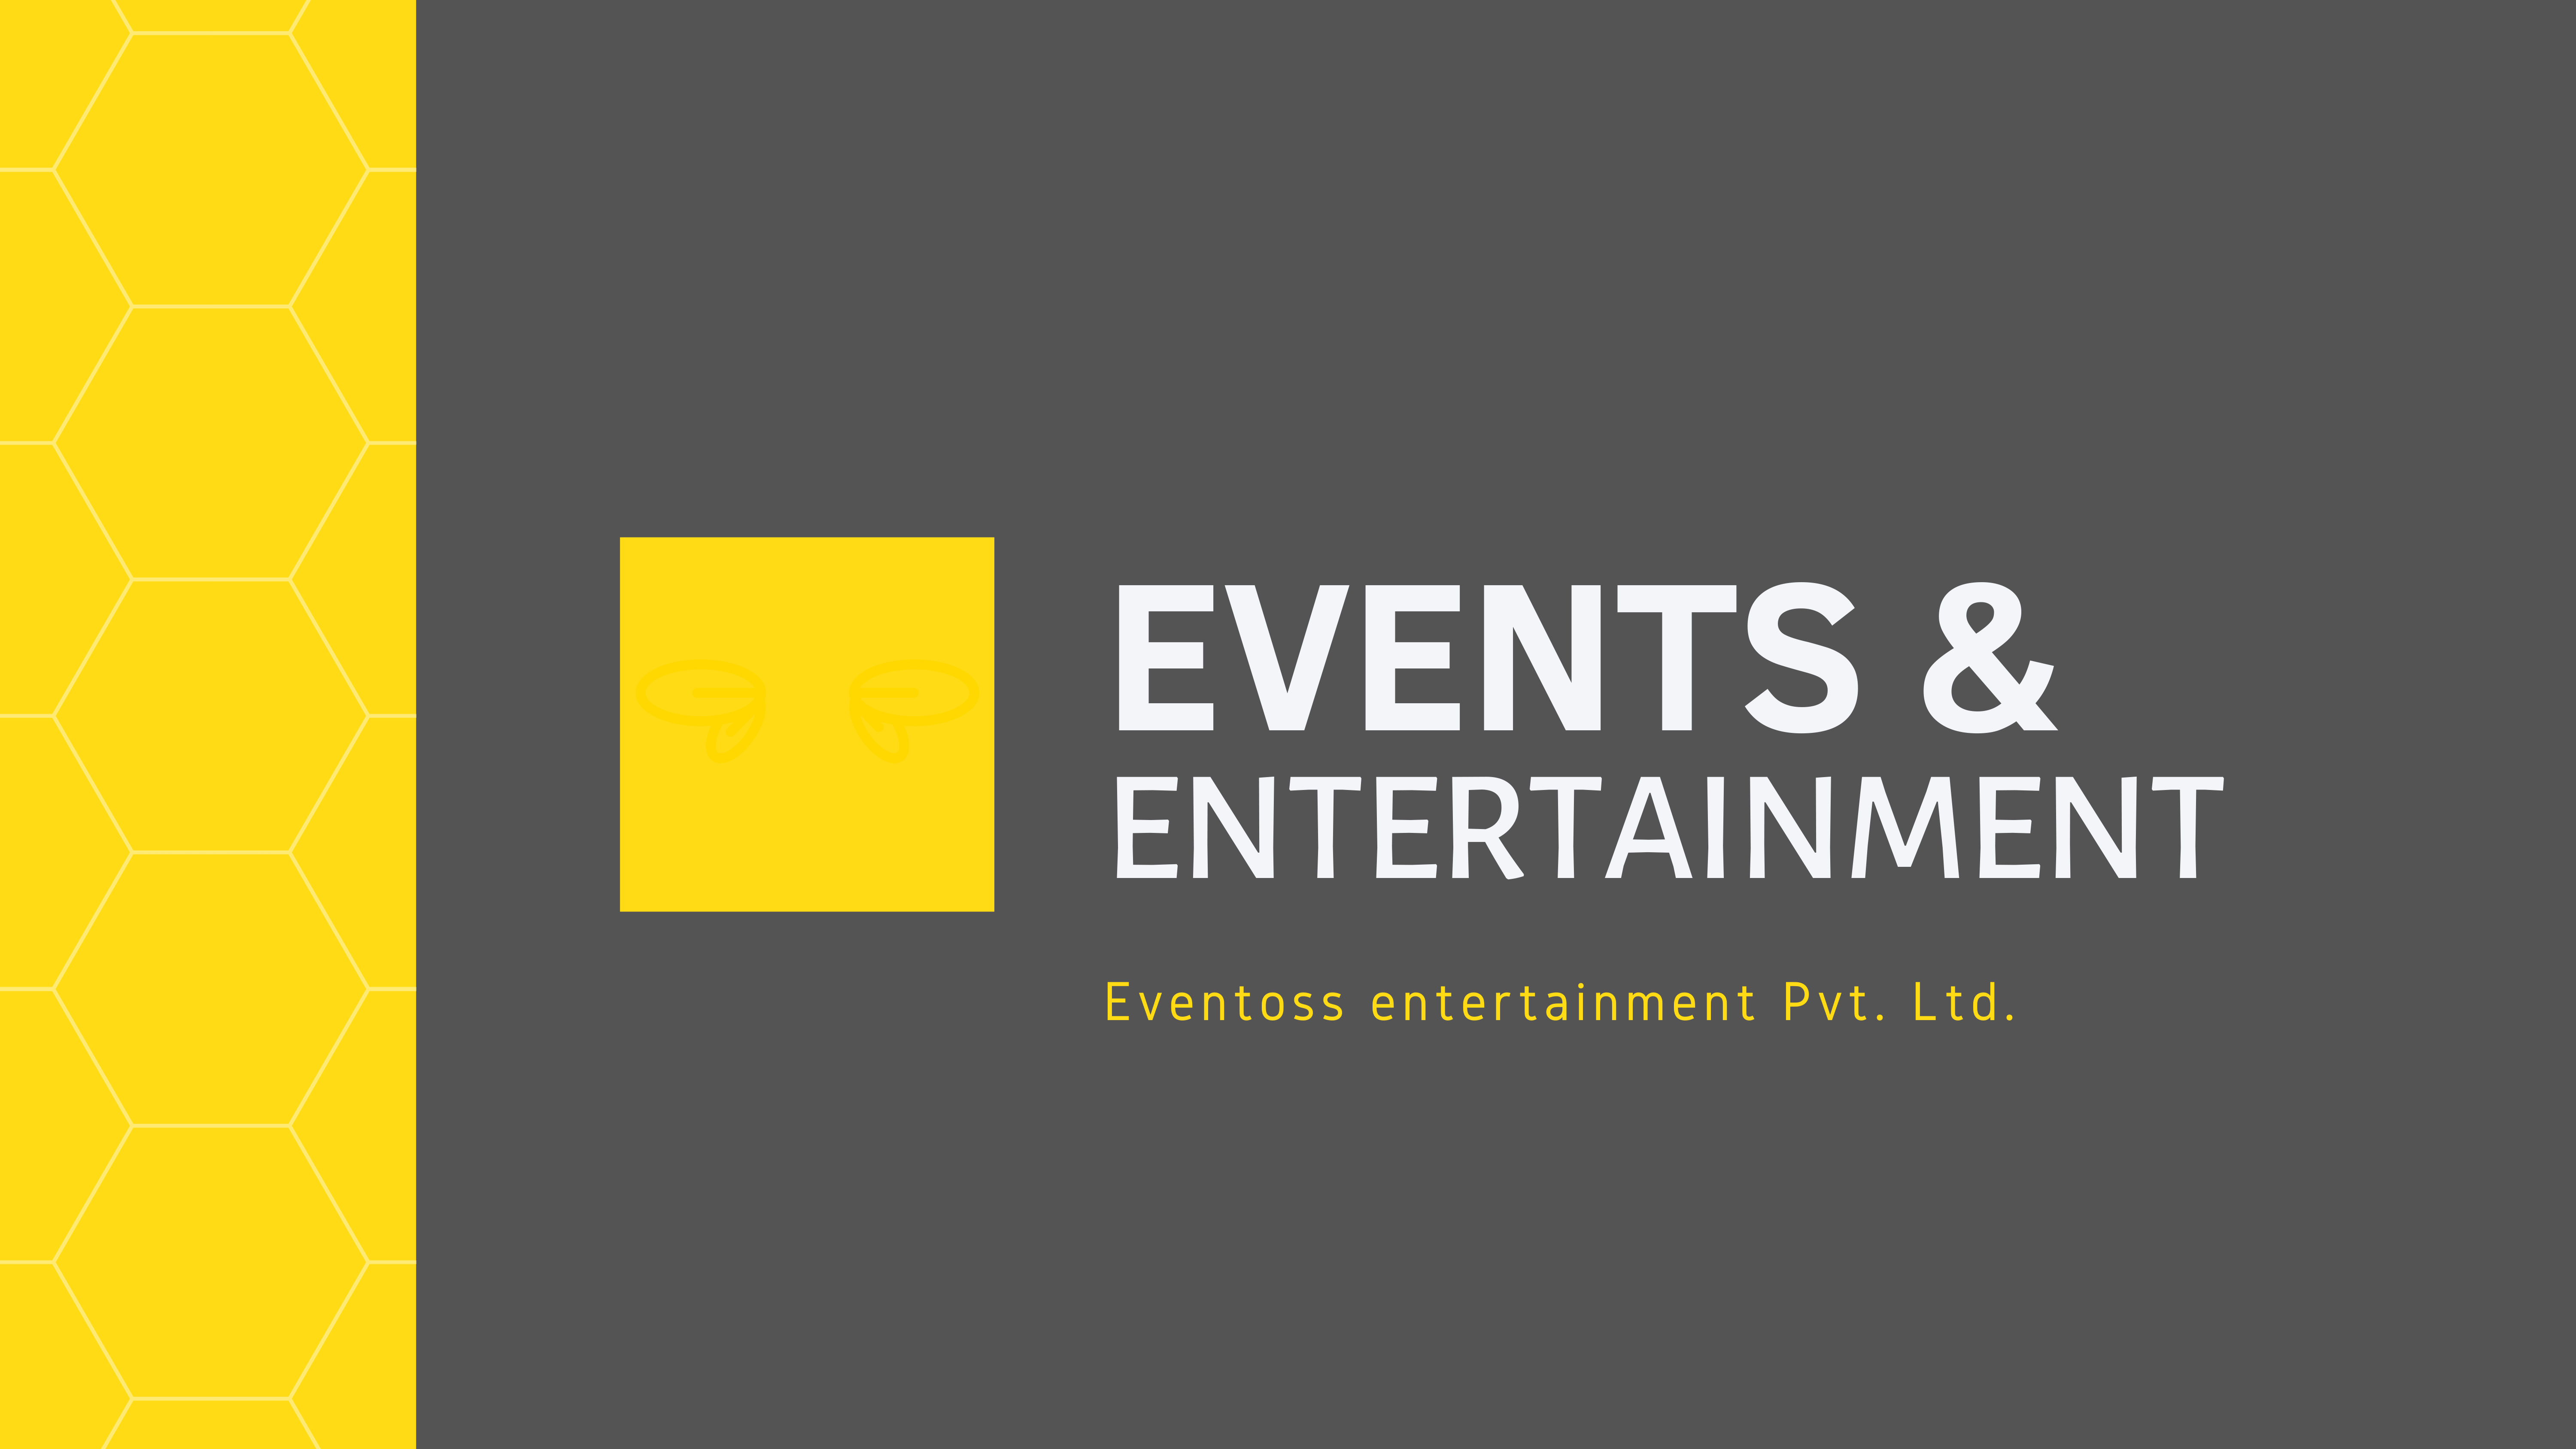 Eventoss Entertainment strives to give the event a personal, customized touch by managing it with perfection. Our services include celebrity management, planning and executing events, expos, seminars, and exhibitions. Best Event Management Company in Patna, Delhi, Ranchi | Event Management Companies in Patna, Delhi, Ranchi | Top Event Management Companies in Patna, Delhi, Ranchi | Top 10 Event Management Companies in Bihar, Jharkhand, New Delhi | Top List of Event Companies in Bihar, Delhi, Ranchi | Event Organisers in Patna, Delhi, Ranchi | Event Organizers in Patna, Delhi, Ranchi | Party Organisers in Patna, Delhi, Ranchi | Party Planner in Patna, Delhi, Ranchi | Event Planners in Patna, Delhi, Ranchi | Corporate Event Organisers in Patna, Delhi, Ranchi | Brand Promotion Agencies in Patna, Delhi, Ranchi | Event Agencies in Patna, Delhi, Ranchi | Event Service Providers in Patna, Delhi, Ranchi | Advertising Agencies in Patna, Delhi, Ranchi | Brand Activations Agencies in Patna, Delhi, Ranchi | BTL Promotion Agencies in Patna, Delhi, Ranchi | Social Media Agency in Patna, Ranchi, Delhi | Digital Marketing Agency in Patna, Delhi, Ranchi | | Advertising Company In Delhi, Patna Ranchi | Radio Ads Company In Patna | TV Ads Company In Delhi | Digital Ads Company In Delhi | Marketing Consultant In Patna, Delhi, Ranchi | Marketing Company In Delhi | Newspaper Ads Company In Patna | Corporate Marketing Company In Delhi | Digital Marketing Company In Delhi, Patna, Ranchi | Newspaper Ads Company In Delhi | Corporate Marketing Company In Patna | Advertising Company In Patna | best-event-management-company-in-patna | event-management-company-in-patna | event-management-companies-in-patna | top-event-management-company-in-patna | corporate-events-company-in-patna | corporate-events-organizers-in-patna | best-corporate-events-organizers-patna | best-corporate-events-company-patna | best-corporate-events-organizers-in-patna